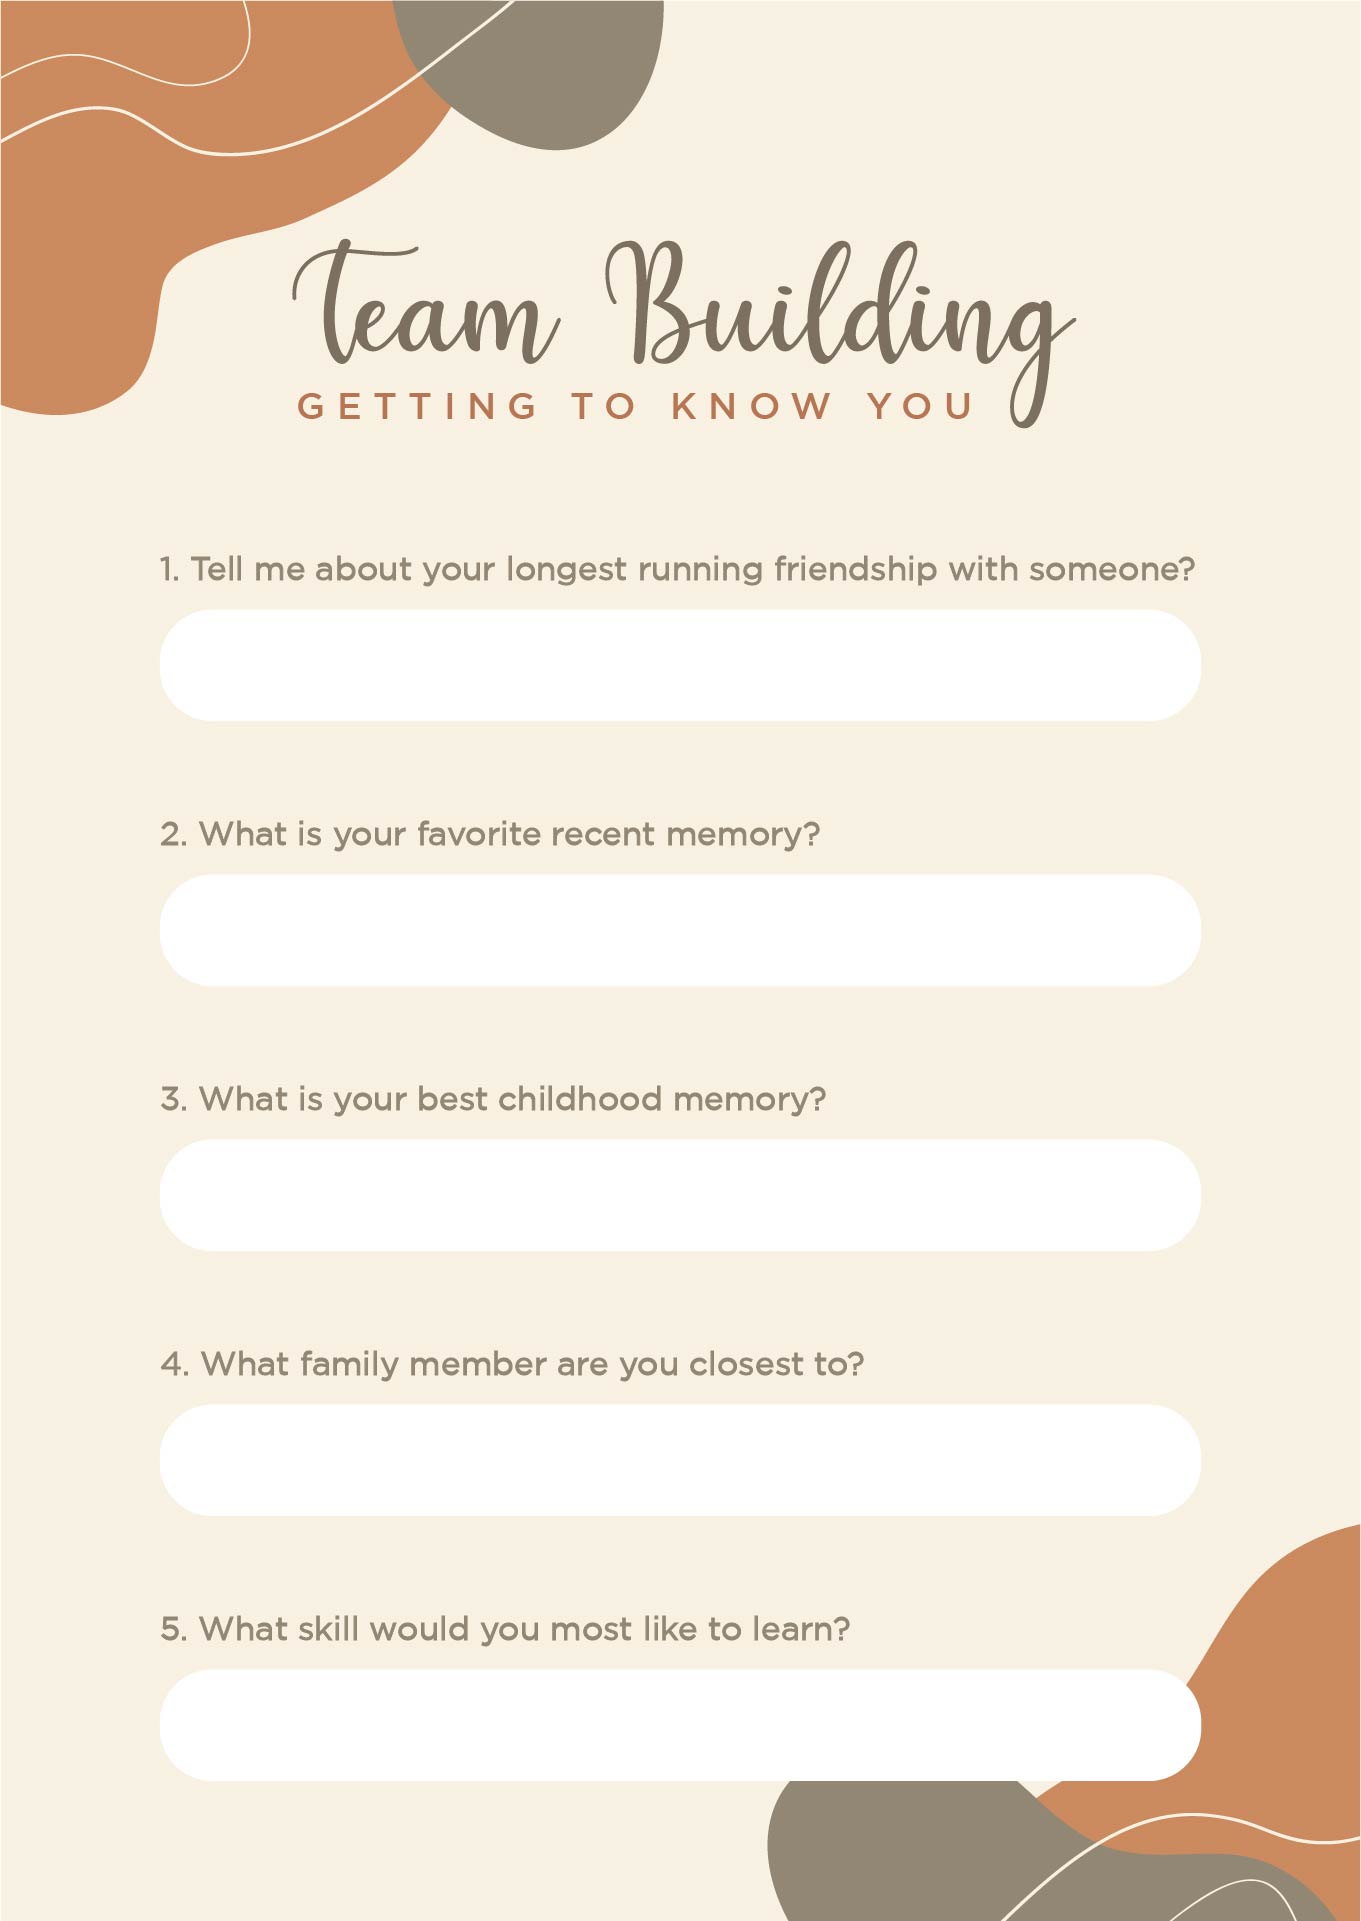 Team Building Activities Get to Know You